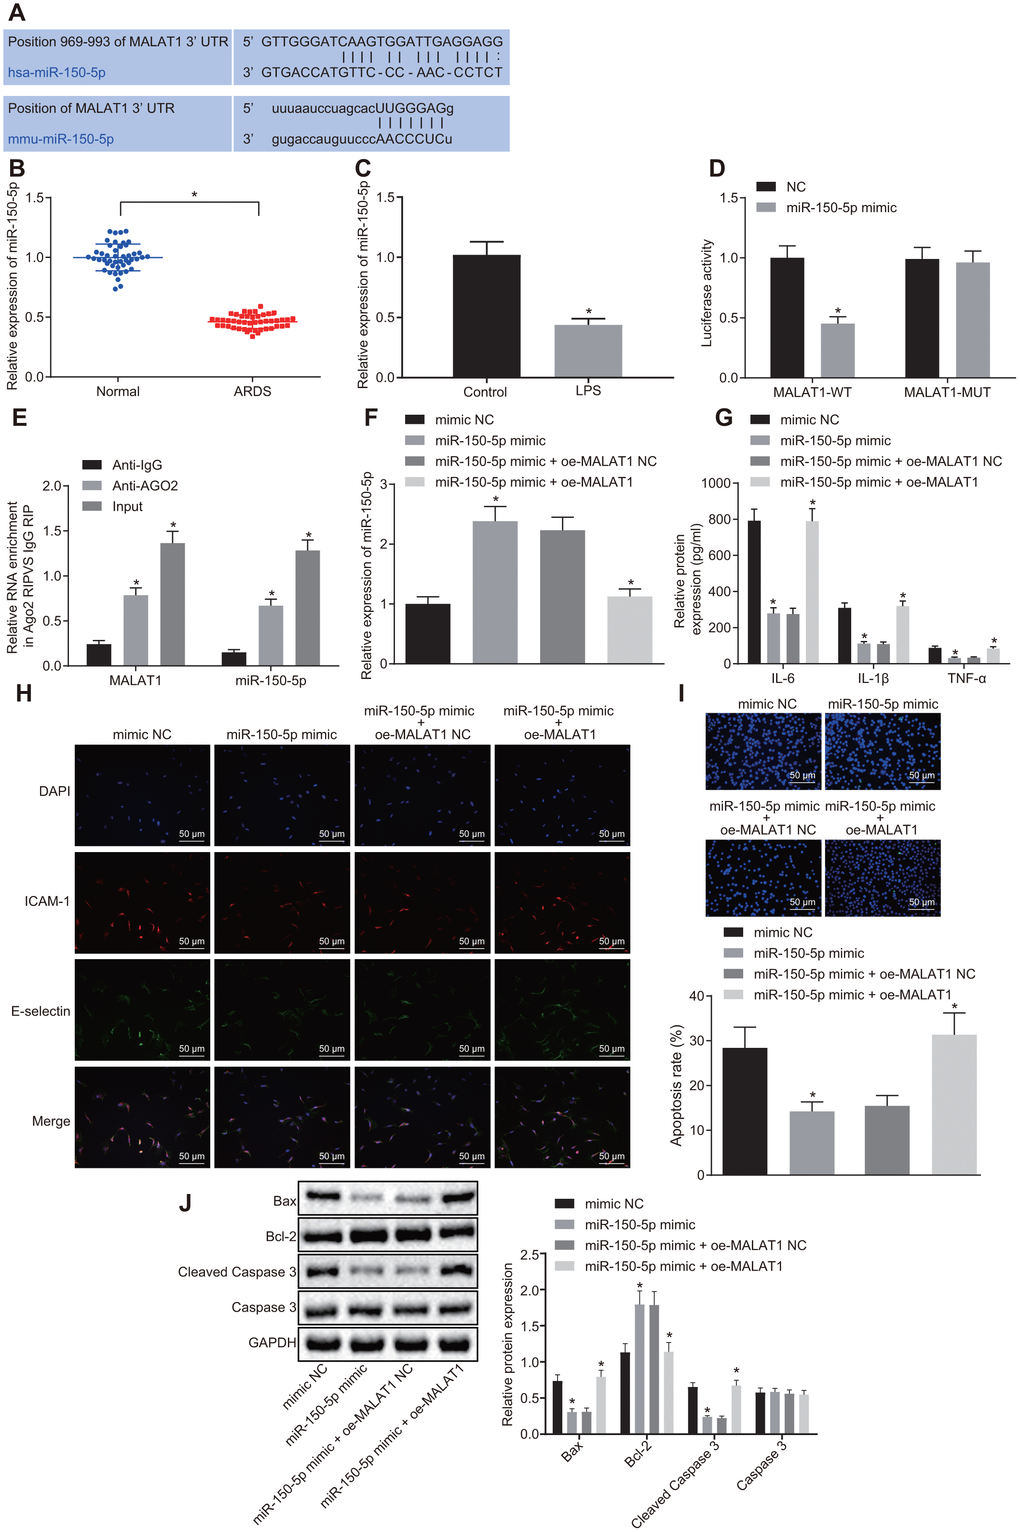 Overexpression of miR-150-5p downregulates MALAT1 expression to suppress apoptosis of HPMECs and decrease the expression of pro-inflammatory cytokines and adhesion factors. (A) The binding site between MALAT1 and miR-150-5p predicted by the starBase website; (B) The expression of miR-150-5p in peripheral blood samples of healthy controls (n = 46) and patients with ARDS (n = 46), as determined by RT-qPCR. * p vs. peripheral blood samples of healthy controls. (C) Expression of miR-150-5p in normal and LPS-treated HPMECs determined by RT-qPCR. * p vs. the control cells. (D) Luciferase activity of MALAT1-WT and MALAT1-MUT. * p vs. cells transfected with NC. (E) The binding of MALAT1 and miR-150-5p and the binding of MALAT1 and AGO2, as analyzed using RIP assay. * p vs. IgG. (F) Expression of miR-150-5p in HPMECs transfected with miR-150-5p mimic or miR-150-5p mimic + oe-MALAT1 determined by RT-qPCR. (G) Expression of pro-inflammatory cytokines (IL-6, IL-1β and TNF-α) in HPMECs transfected with miR-150-5p mimic or miR-150-5p mimic + oe-MALAT1 determined by ELISA. (H) Expression of endothelial cell adhesion molecules (E-selectin and ICAM-1) in HPMECs transfected with miR-150-5p mimic or miR-150-5p mimic + oe-MALAT1 detected by immunofluorescence (× 200). (I) HPMEC apoptosis upon transfection with miR-150-5p mimic or miR-150-5p mimic + oe-MALAT1 detected by TUNEL assay (× 200). (J) Expression of Bcl-2, Bax, cleaved caspase 3 and Caspase3 in HPMECs transfected with miR-150-5p mimic or miR-150-5p mimic + oe-MALAT1 detected by Western blot analysis. * p vs. cells transfected with miR-150-5p mimic NC or miR-150-5p mimic + oe-MALAT1 NC. The data were measurement data and expressed as mean ± standard deviation. The data between two groups were compared using unpaired t-test and those among multiple groups were analyzed by one-way ANOVA, with Tukey's post hoc test. The cell experiment was repeated three times independently.